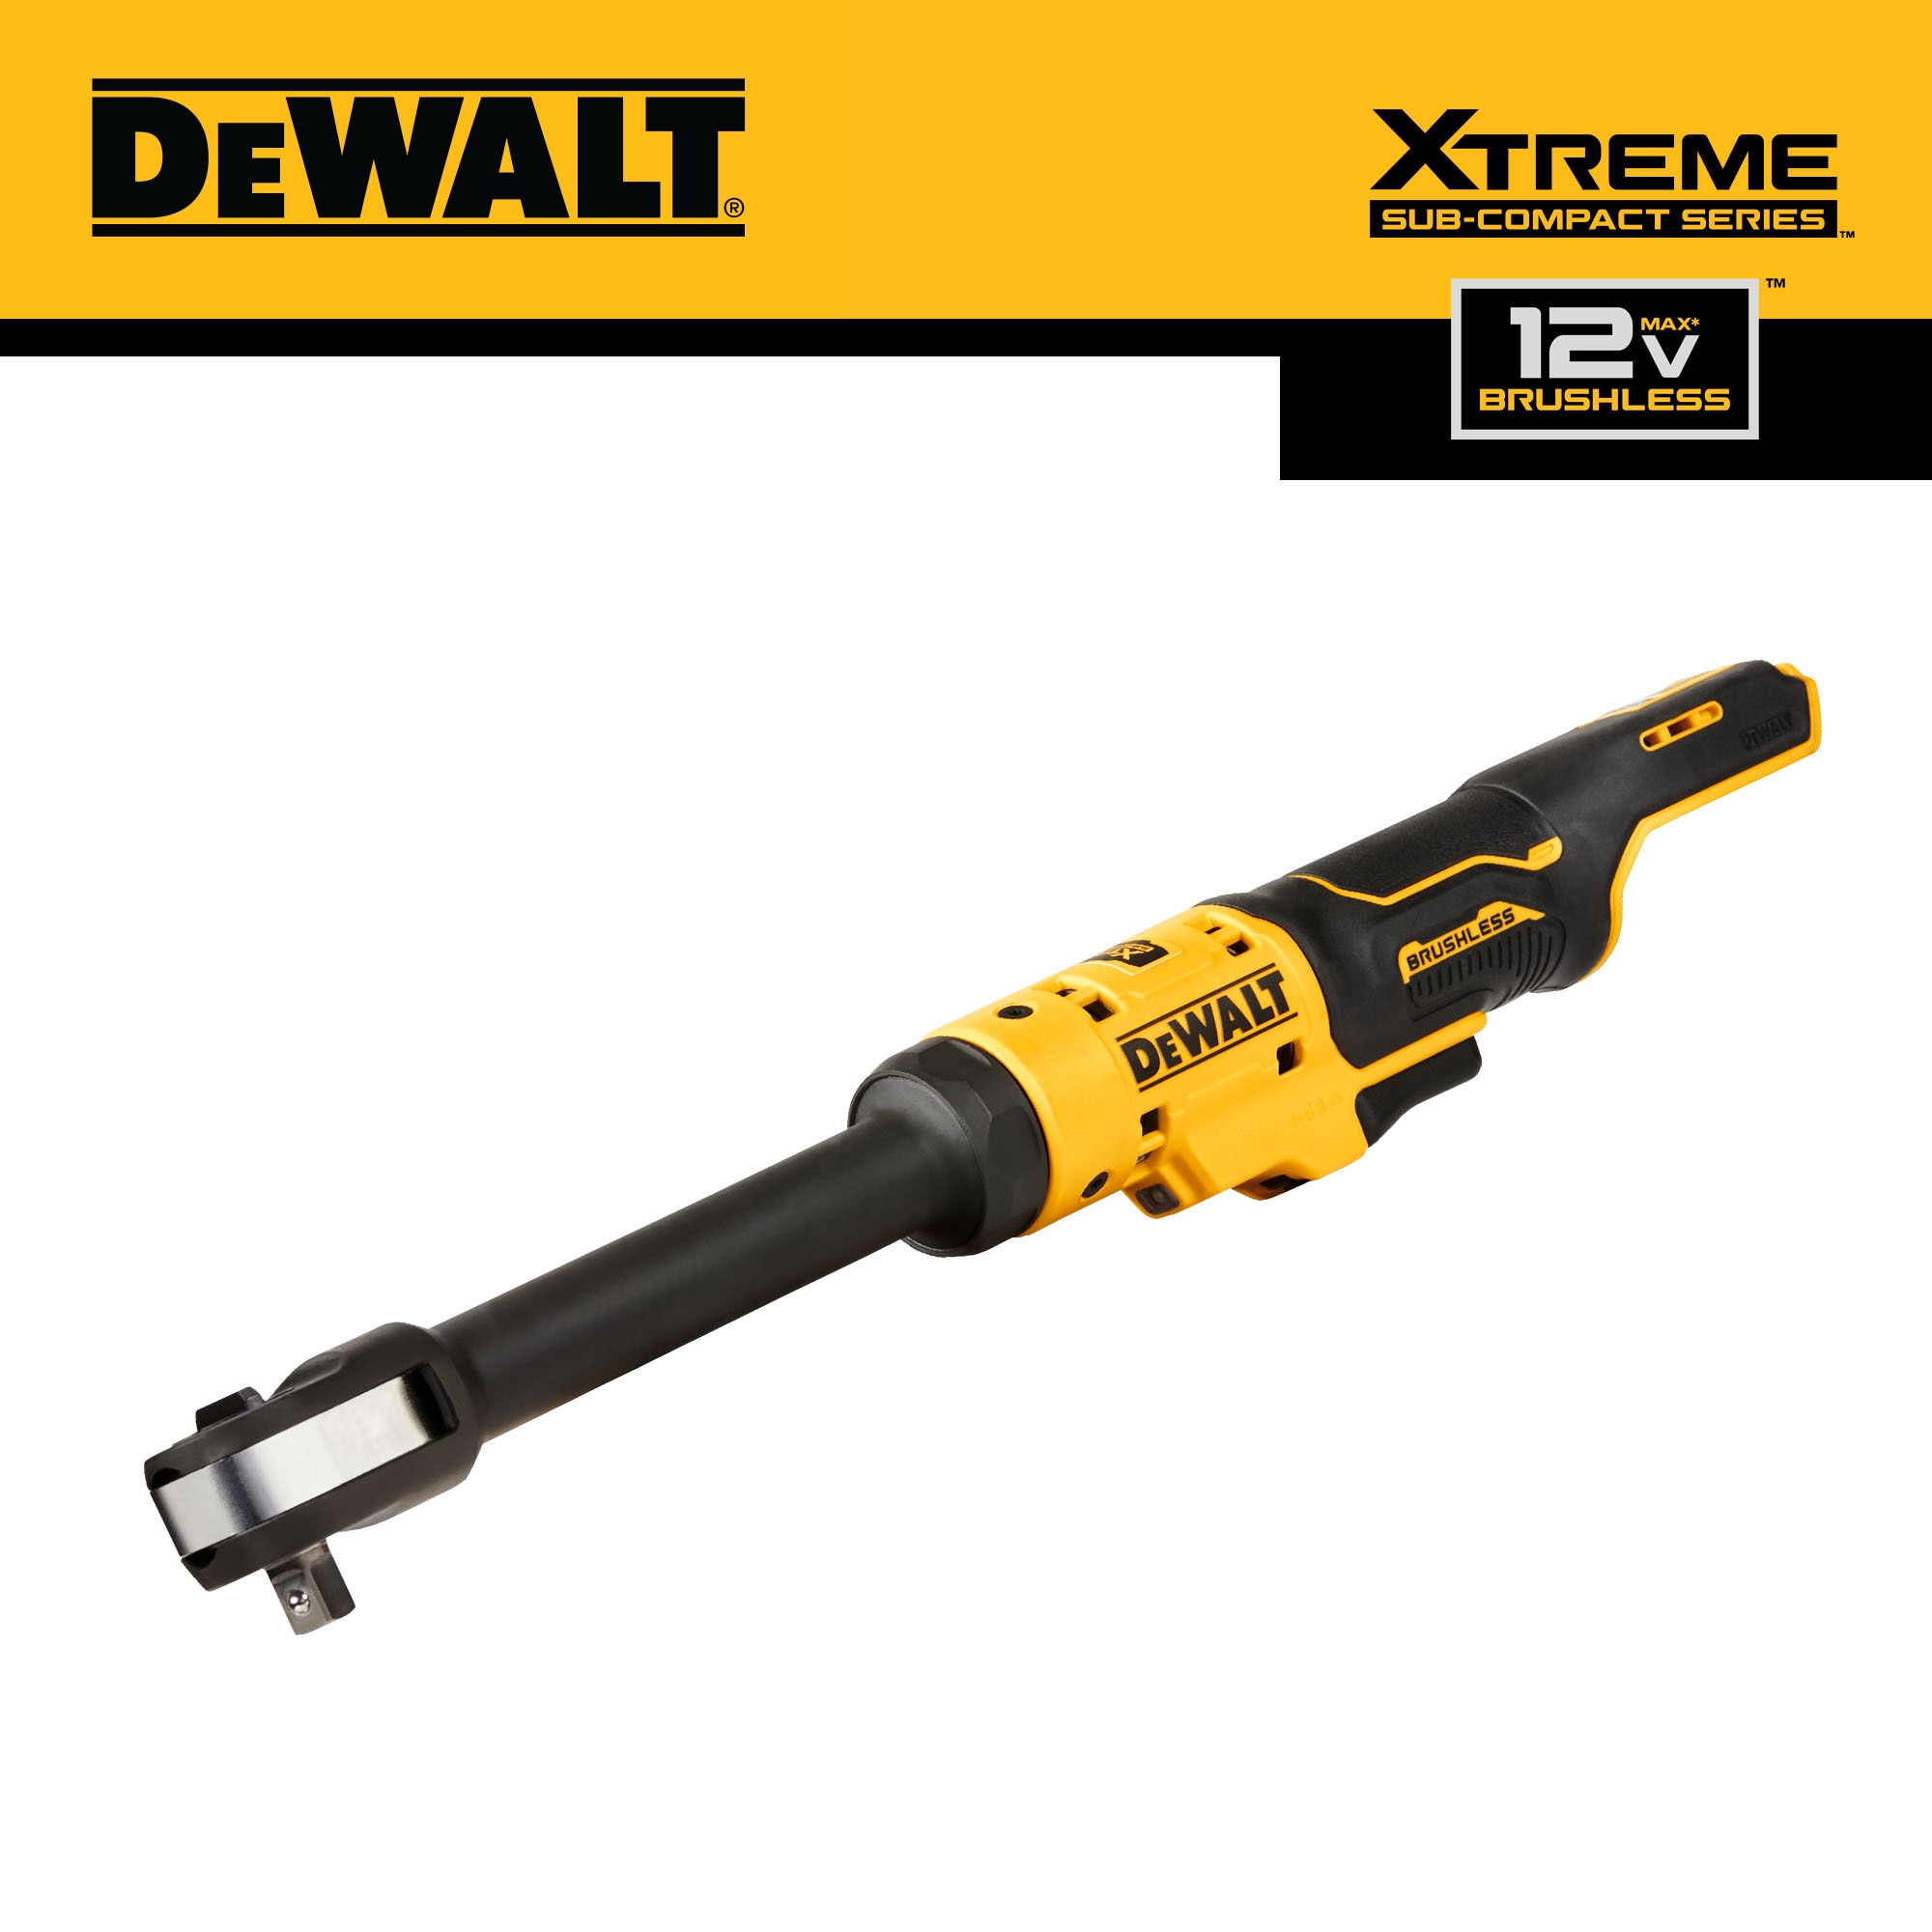 XTREME Variable Speed Brushless 3/8-in Drive Cordless Ratchet Wrench (Bare Tool) in Yellow | - DEWALT DCF503EB